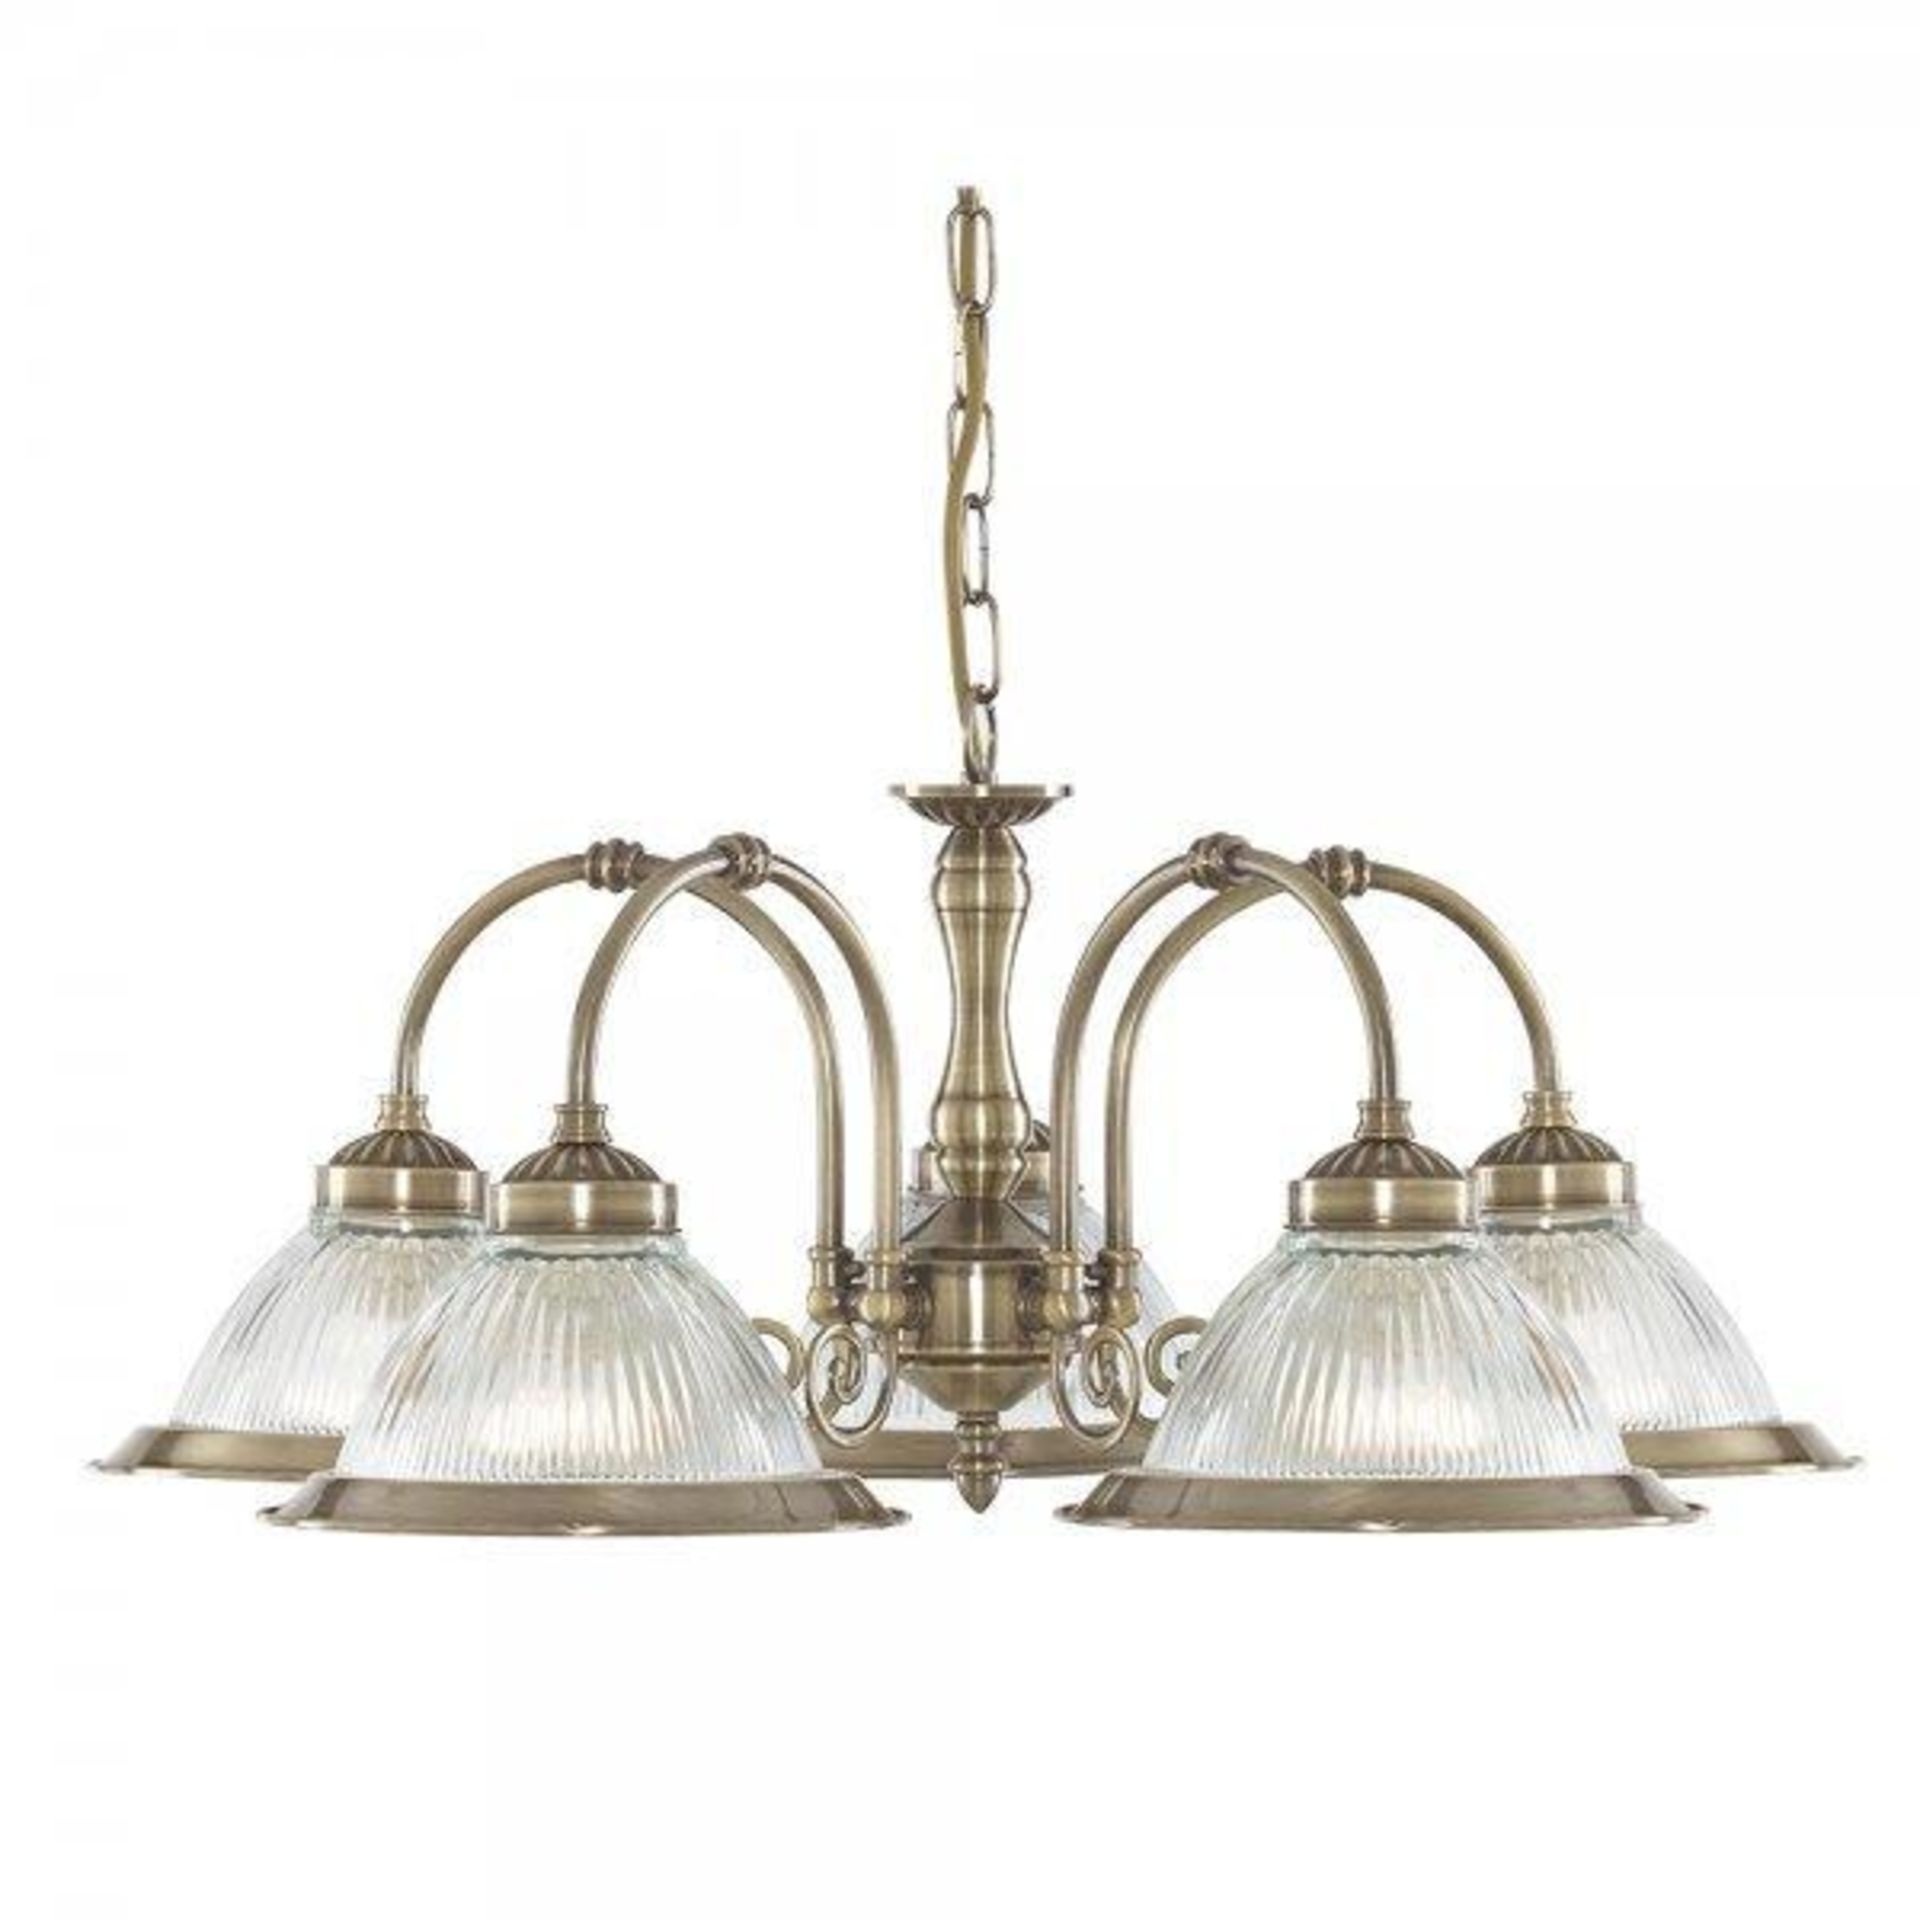 1 x American Diner 5 Light Ceiling Light Antique Brass - New Boxed Stock - CL364 - Ref: ERP1- 9345-5 - Image 3 of 3